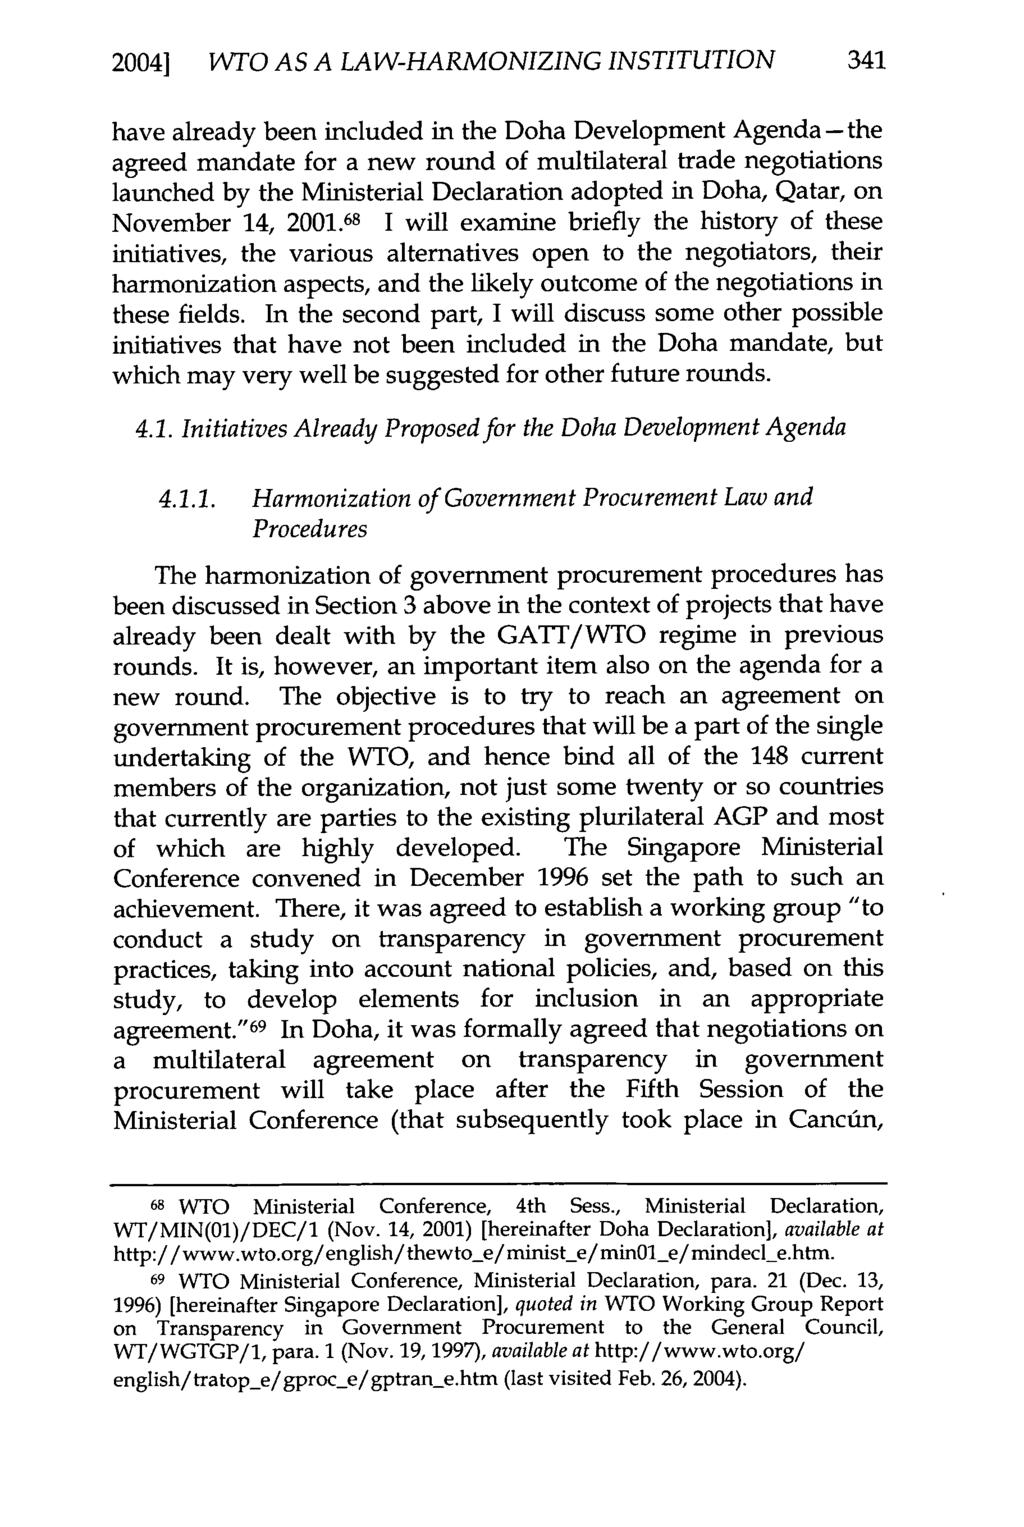 2004] WTO AS A LAW-HARMONIZING INSTITUTION 341 have already been included in the Doha Development Agenda- the agreed mandate for a new round of multilateral trade negotiations launched by the